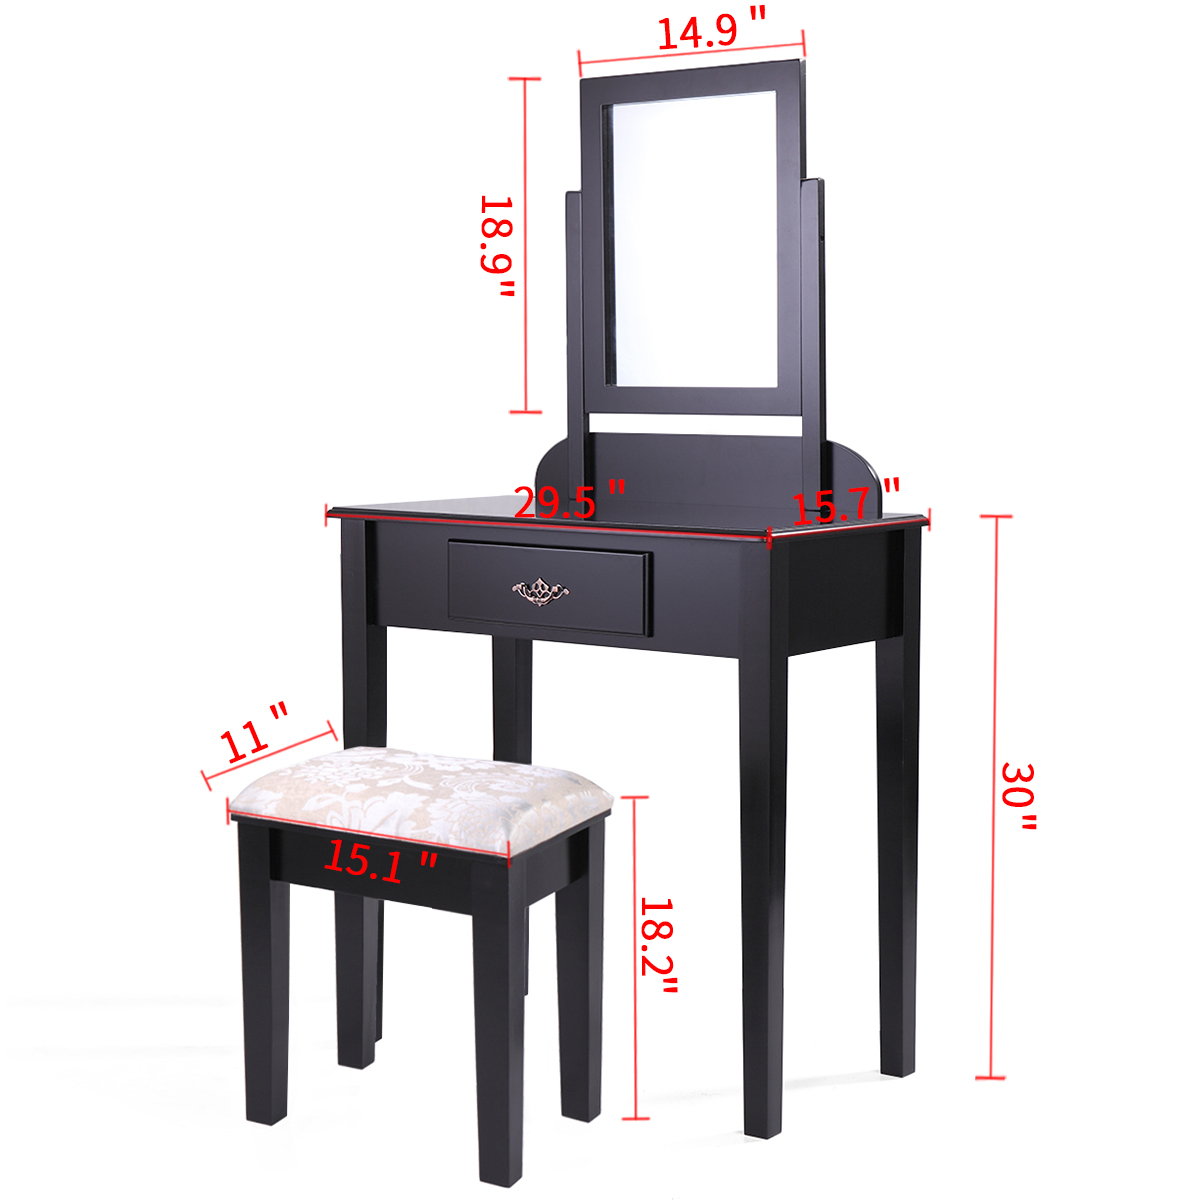 JAXPETY Black Wood Makeup Vanity Set Dressing Table Furniture with Rotating Rectangular Mirror & Drawer for Bedroom & Bathroom